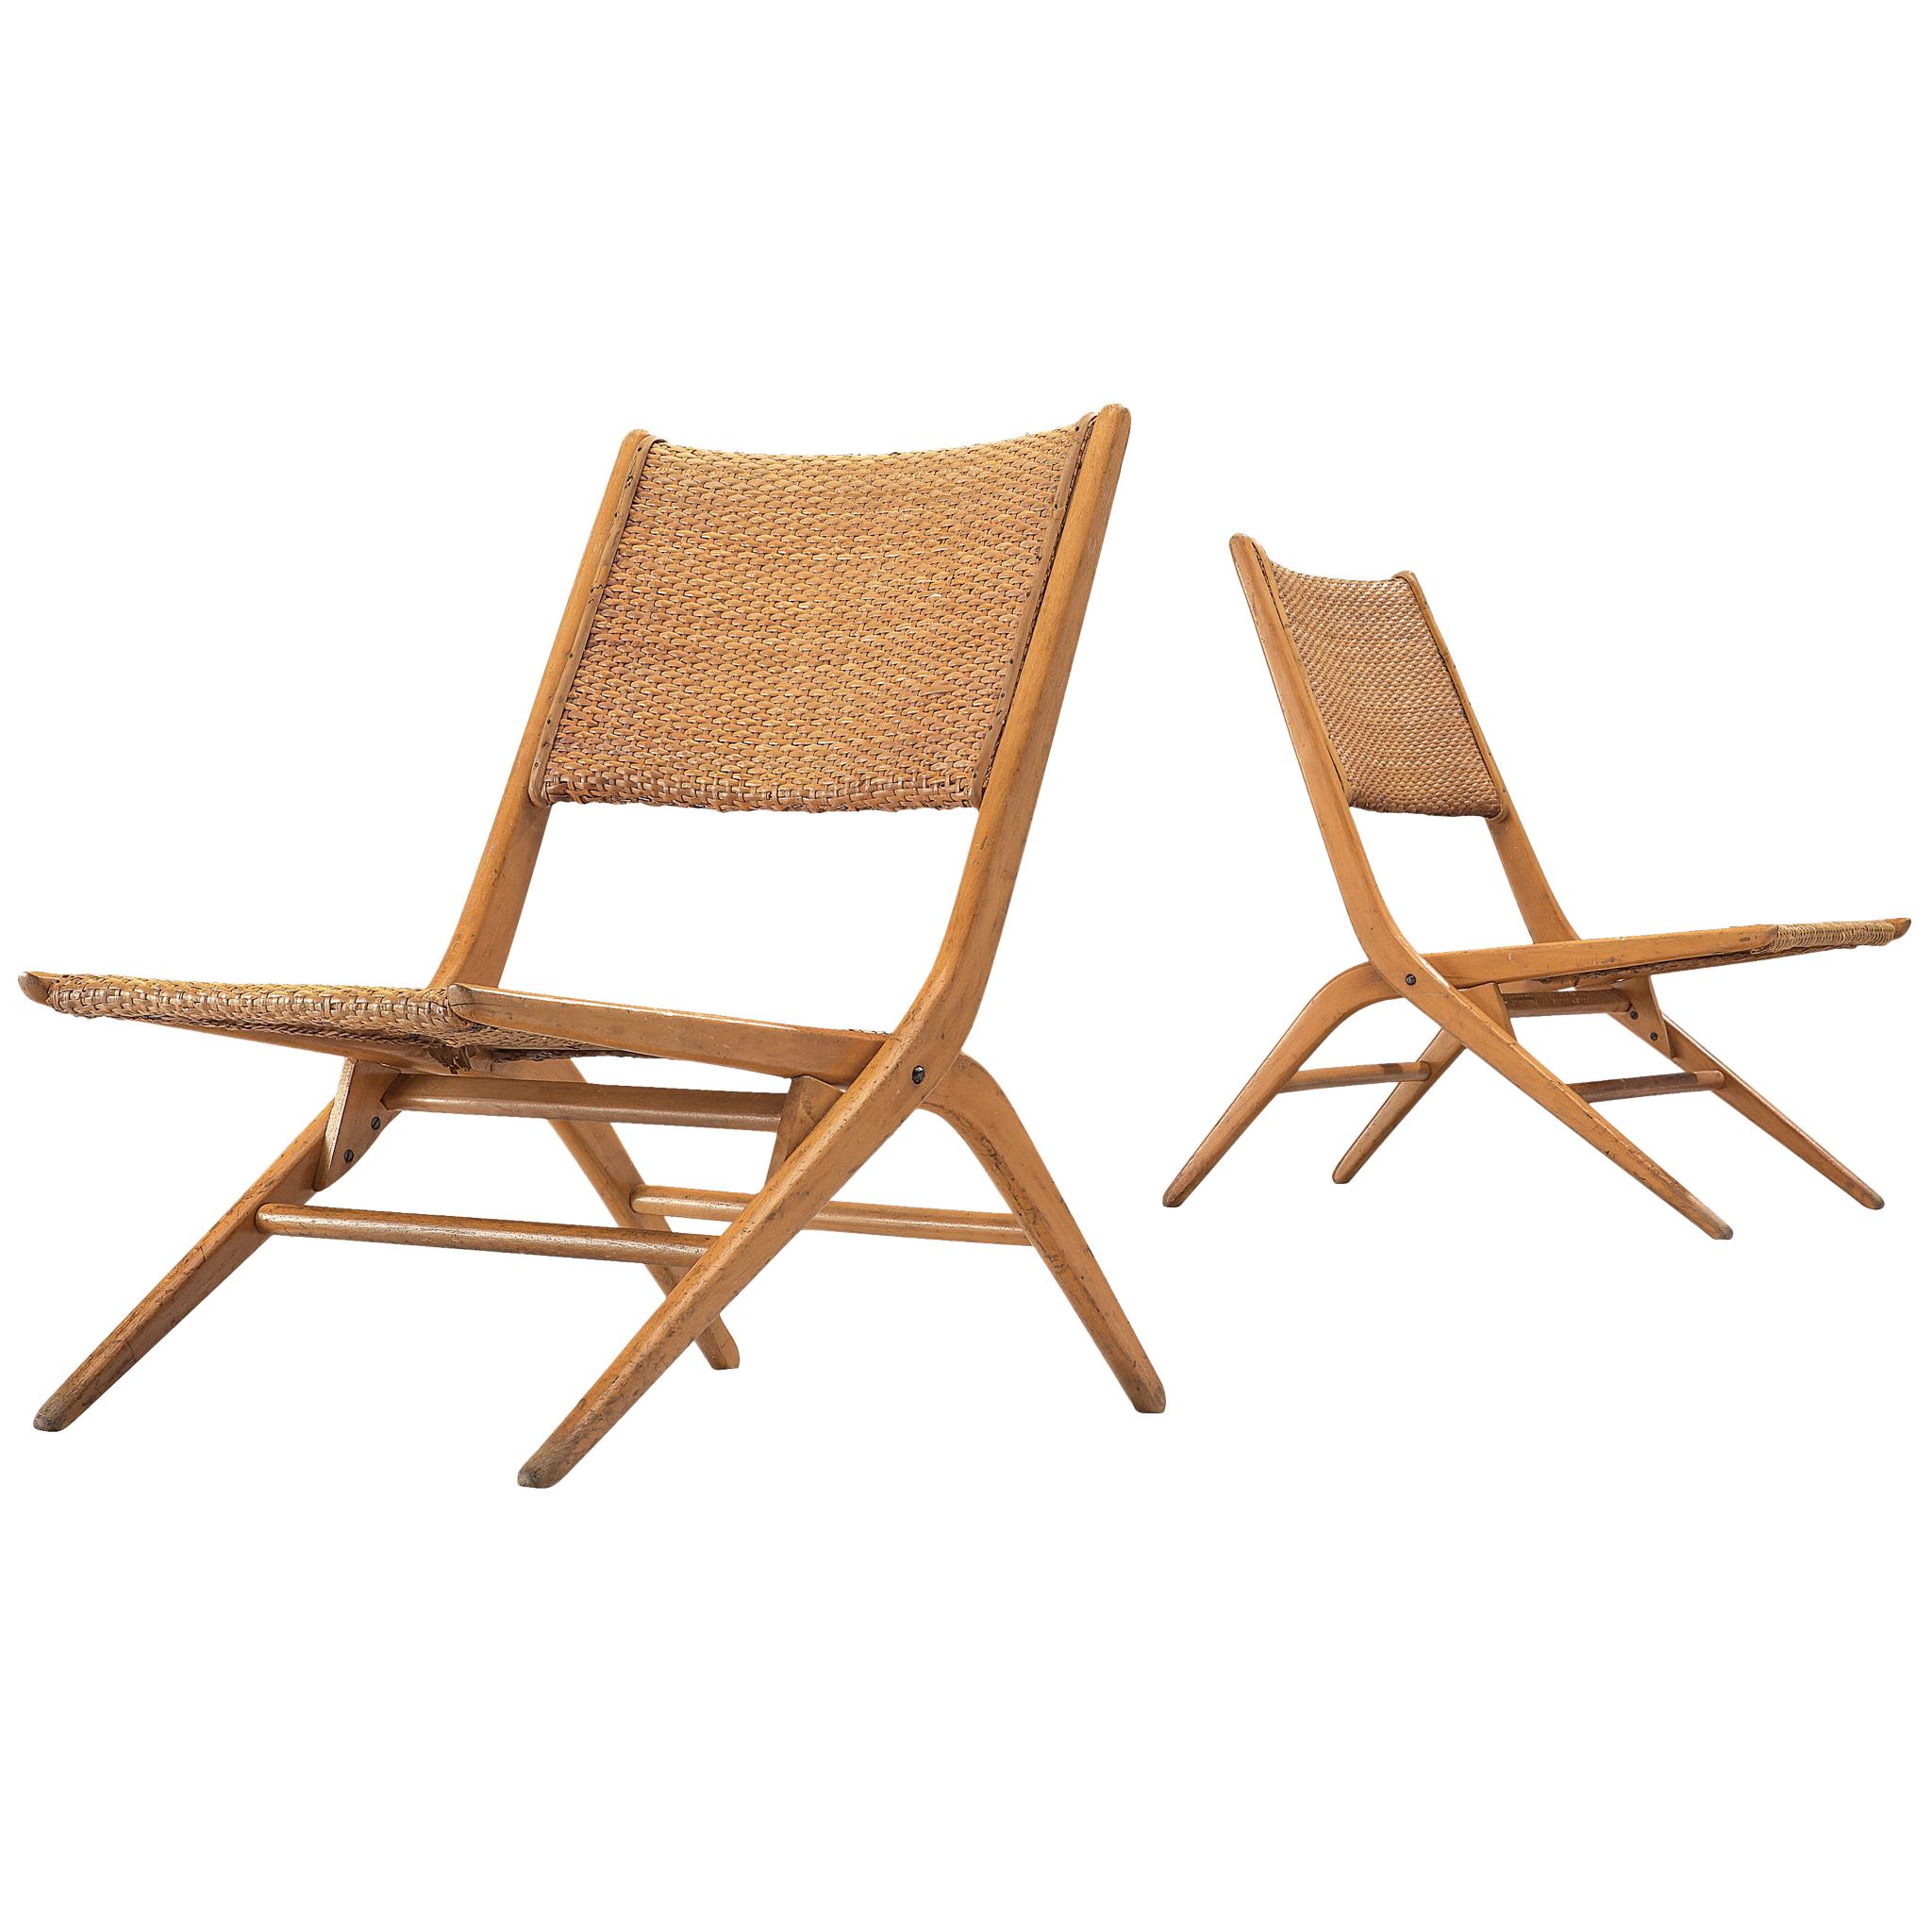 Pair of Folding Woven Slipper Chairs in Beech